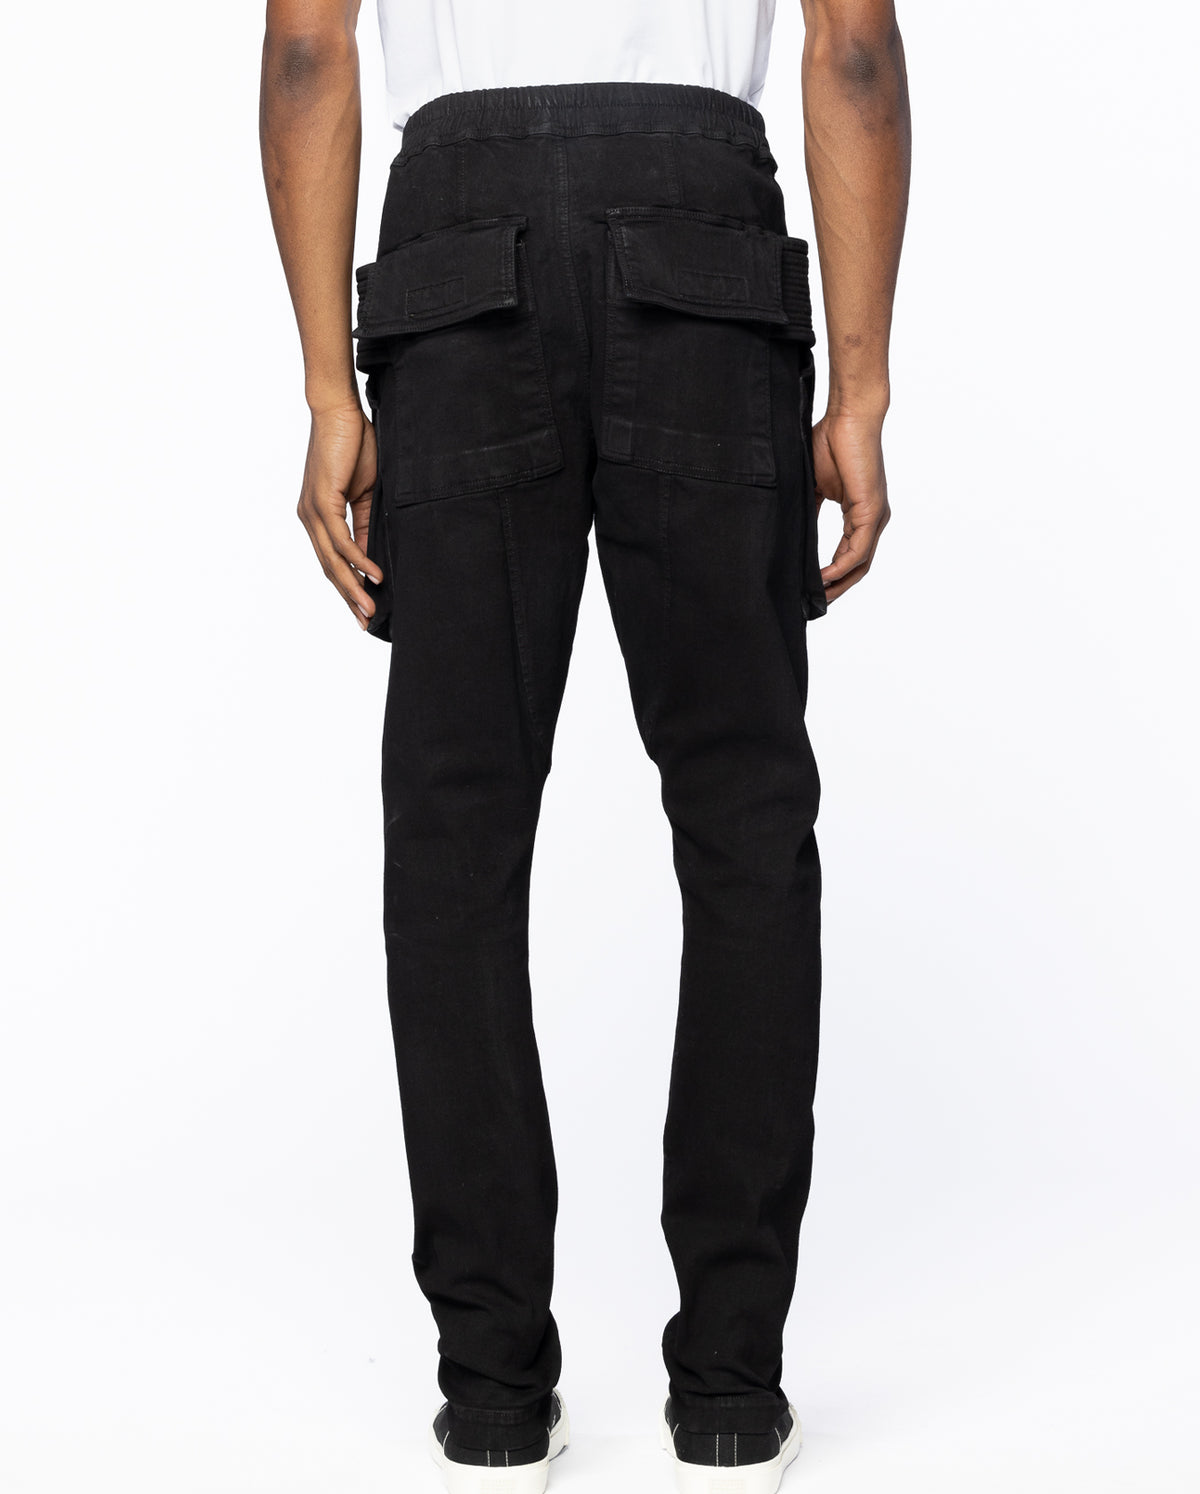 Creatch Cargo Pants With Drawstring - Black